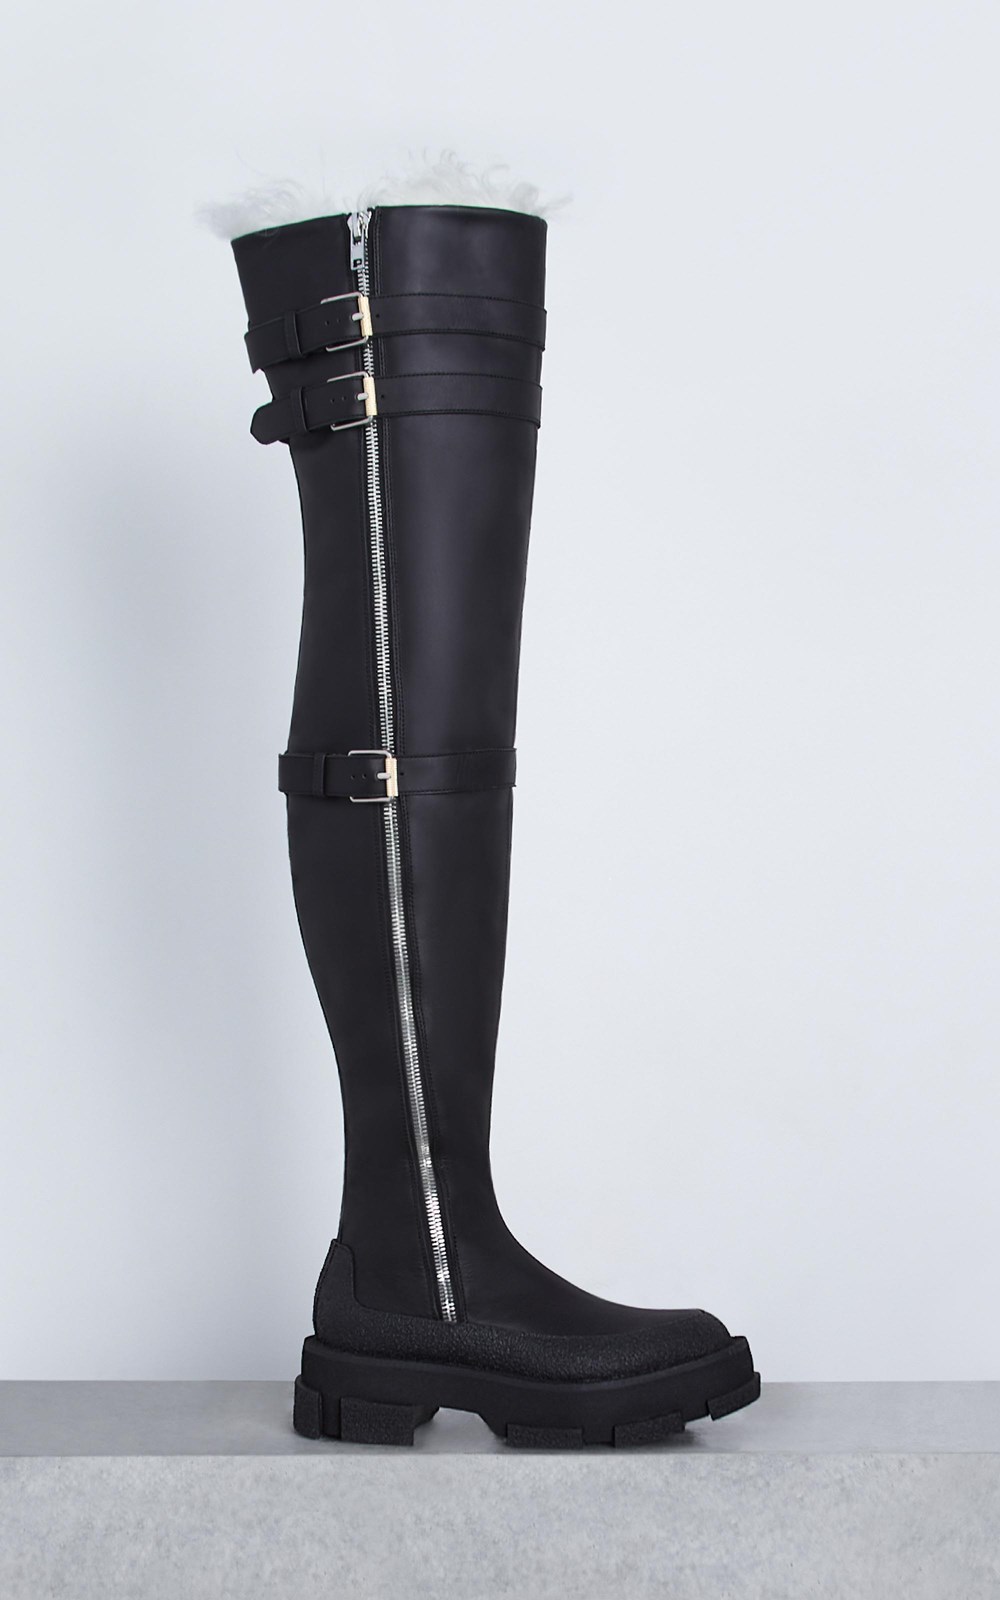 Unisex | GAO THIGH HIGH UNISEX BOOT w SHEARLING